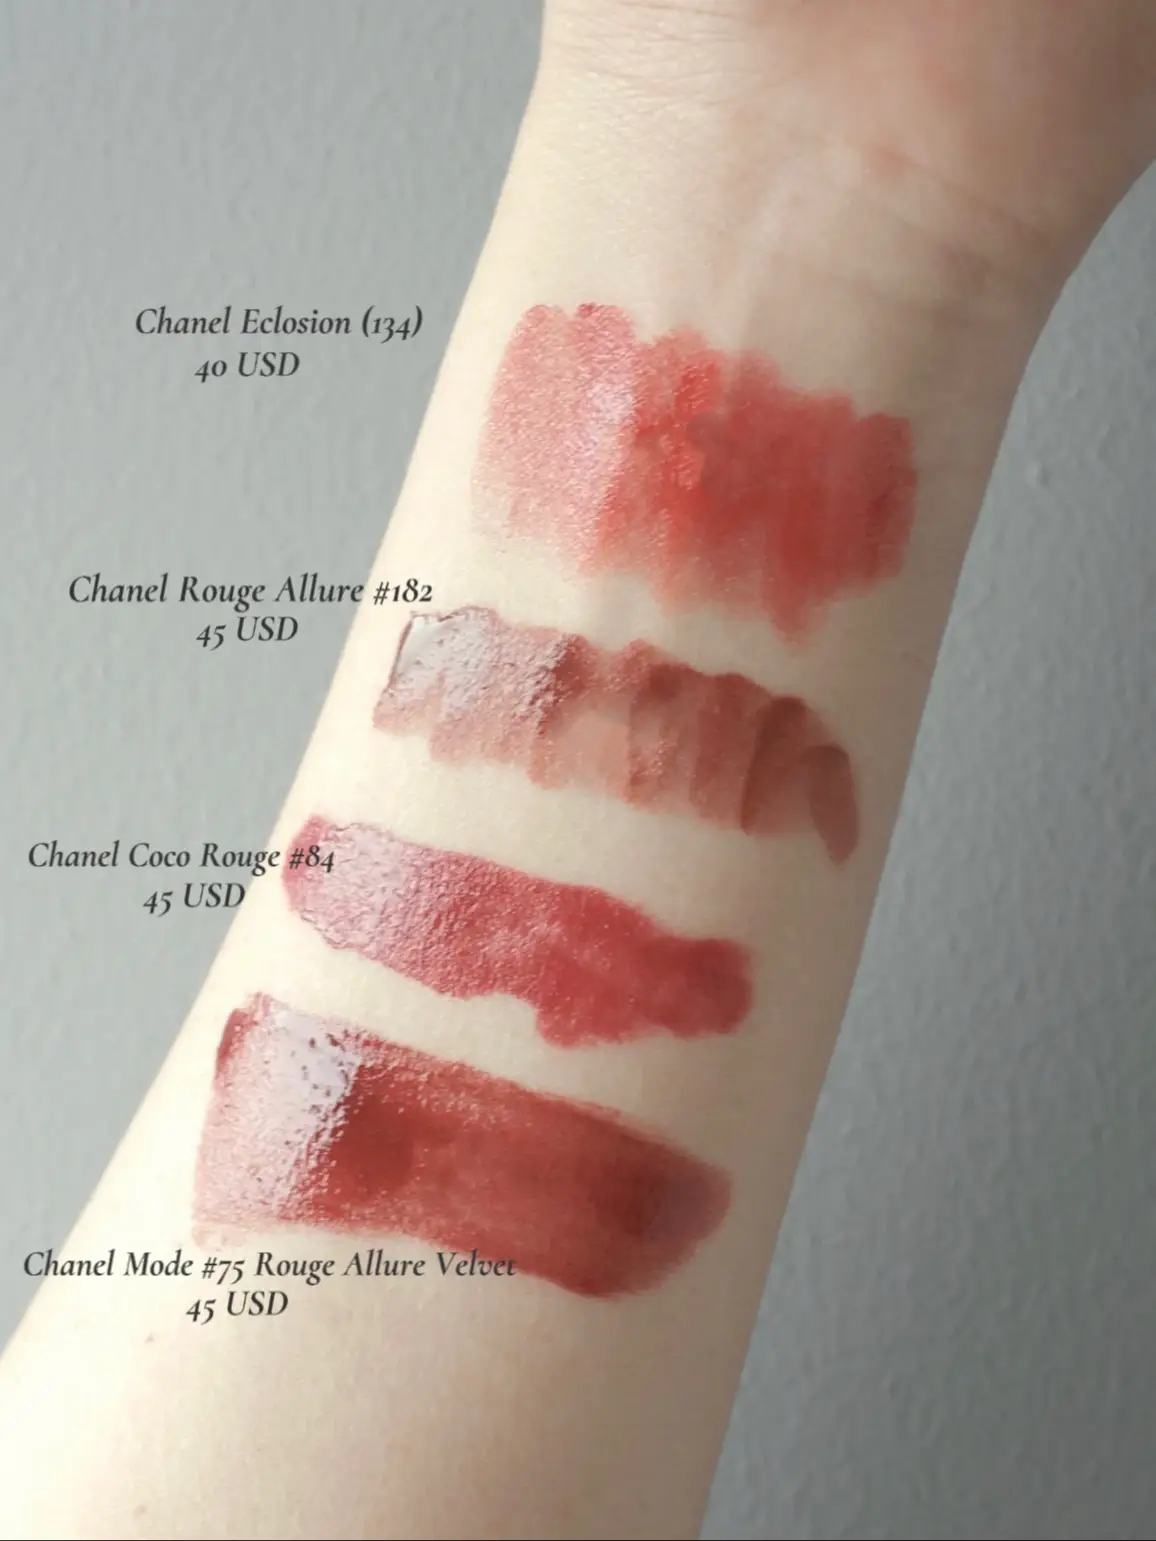 MY NUDE SHADES OF LIPSTICK FROM CHANEL, Gallery posted by Liza Vidal